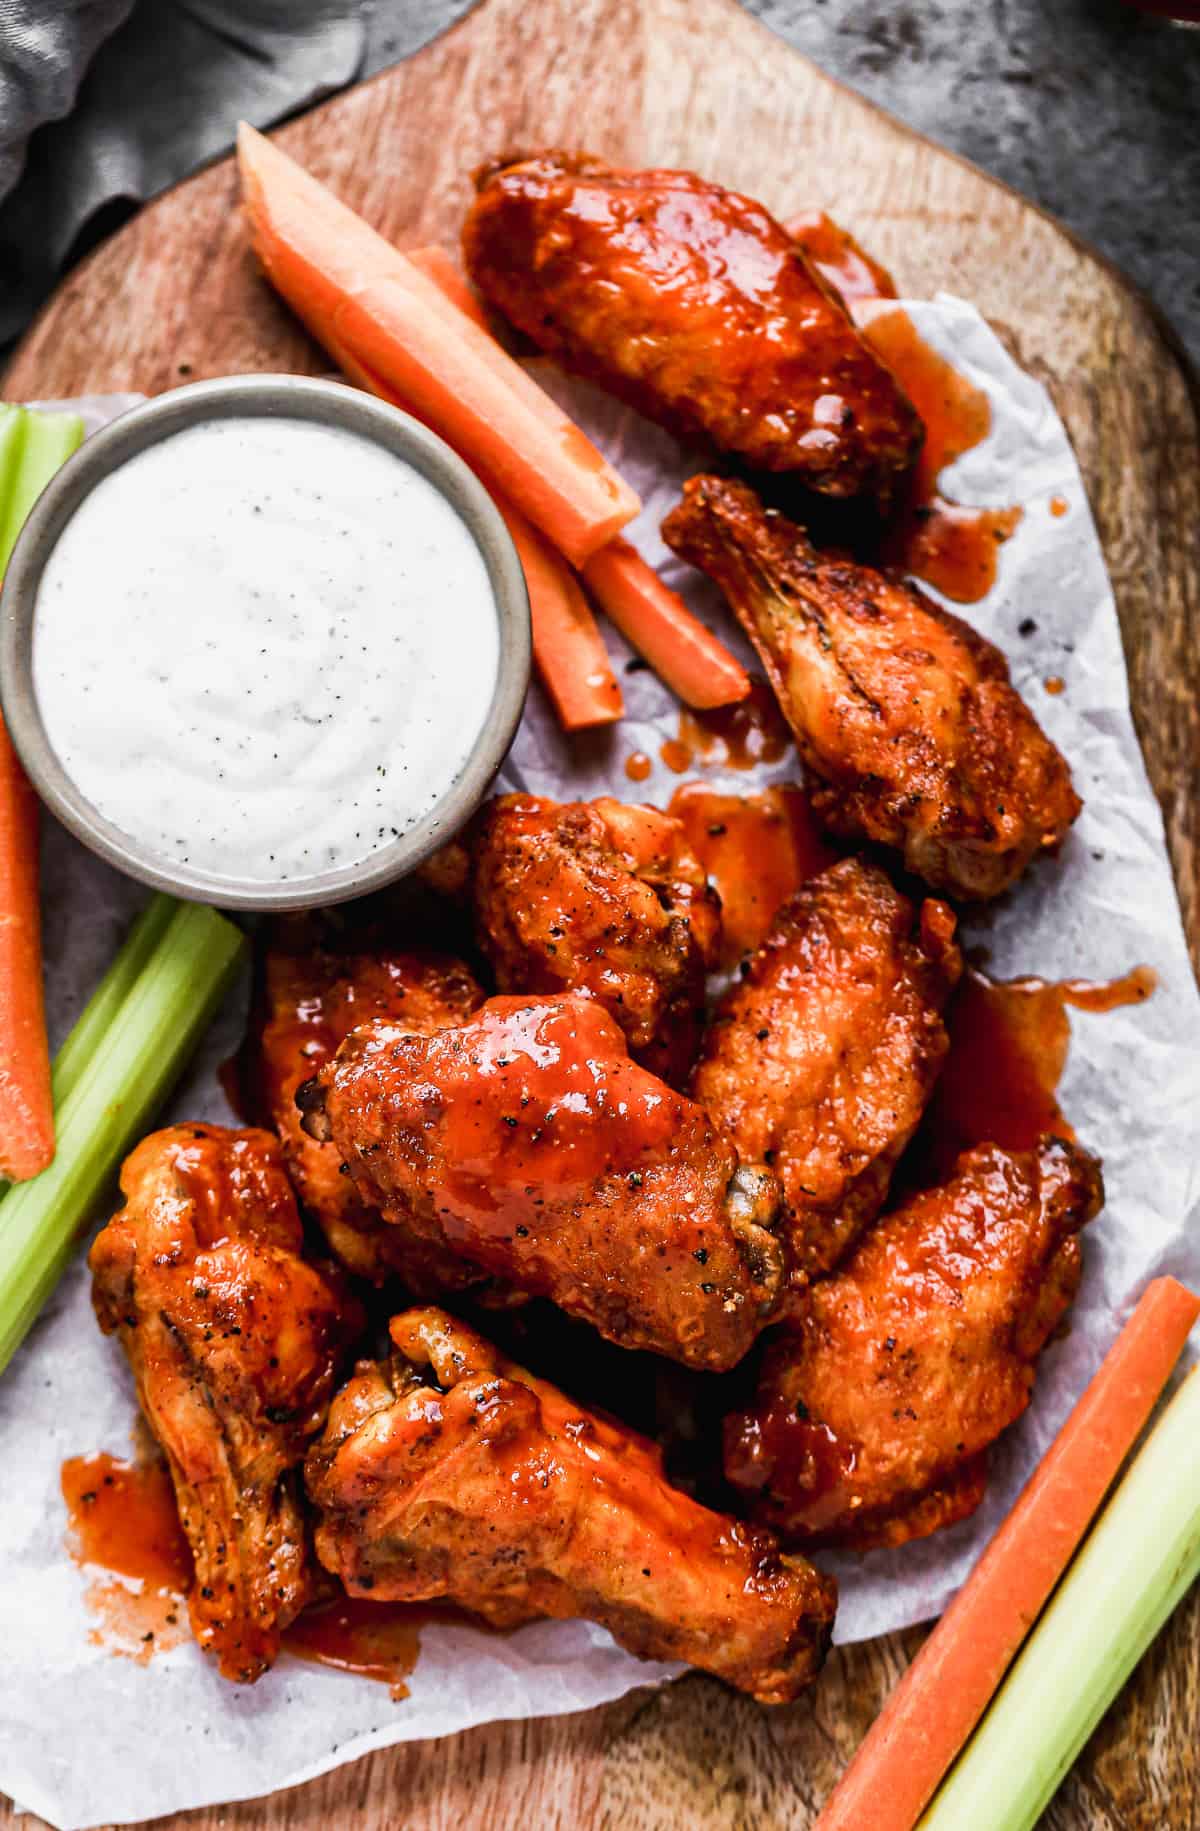 The best air fryer chicken wings on a wooden platter with carrots, celery, and a side of ranch.